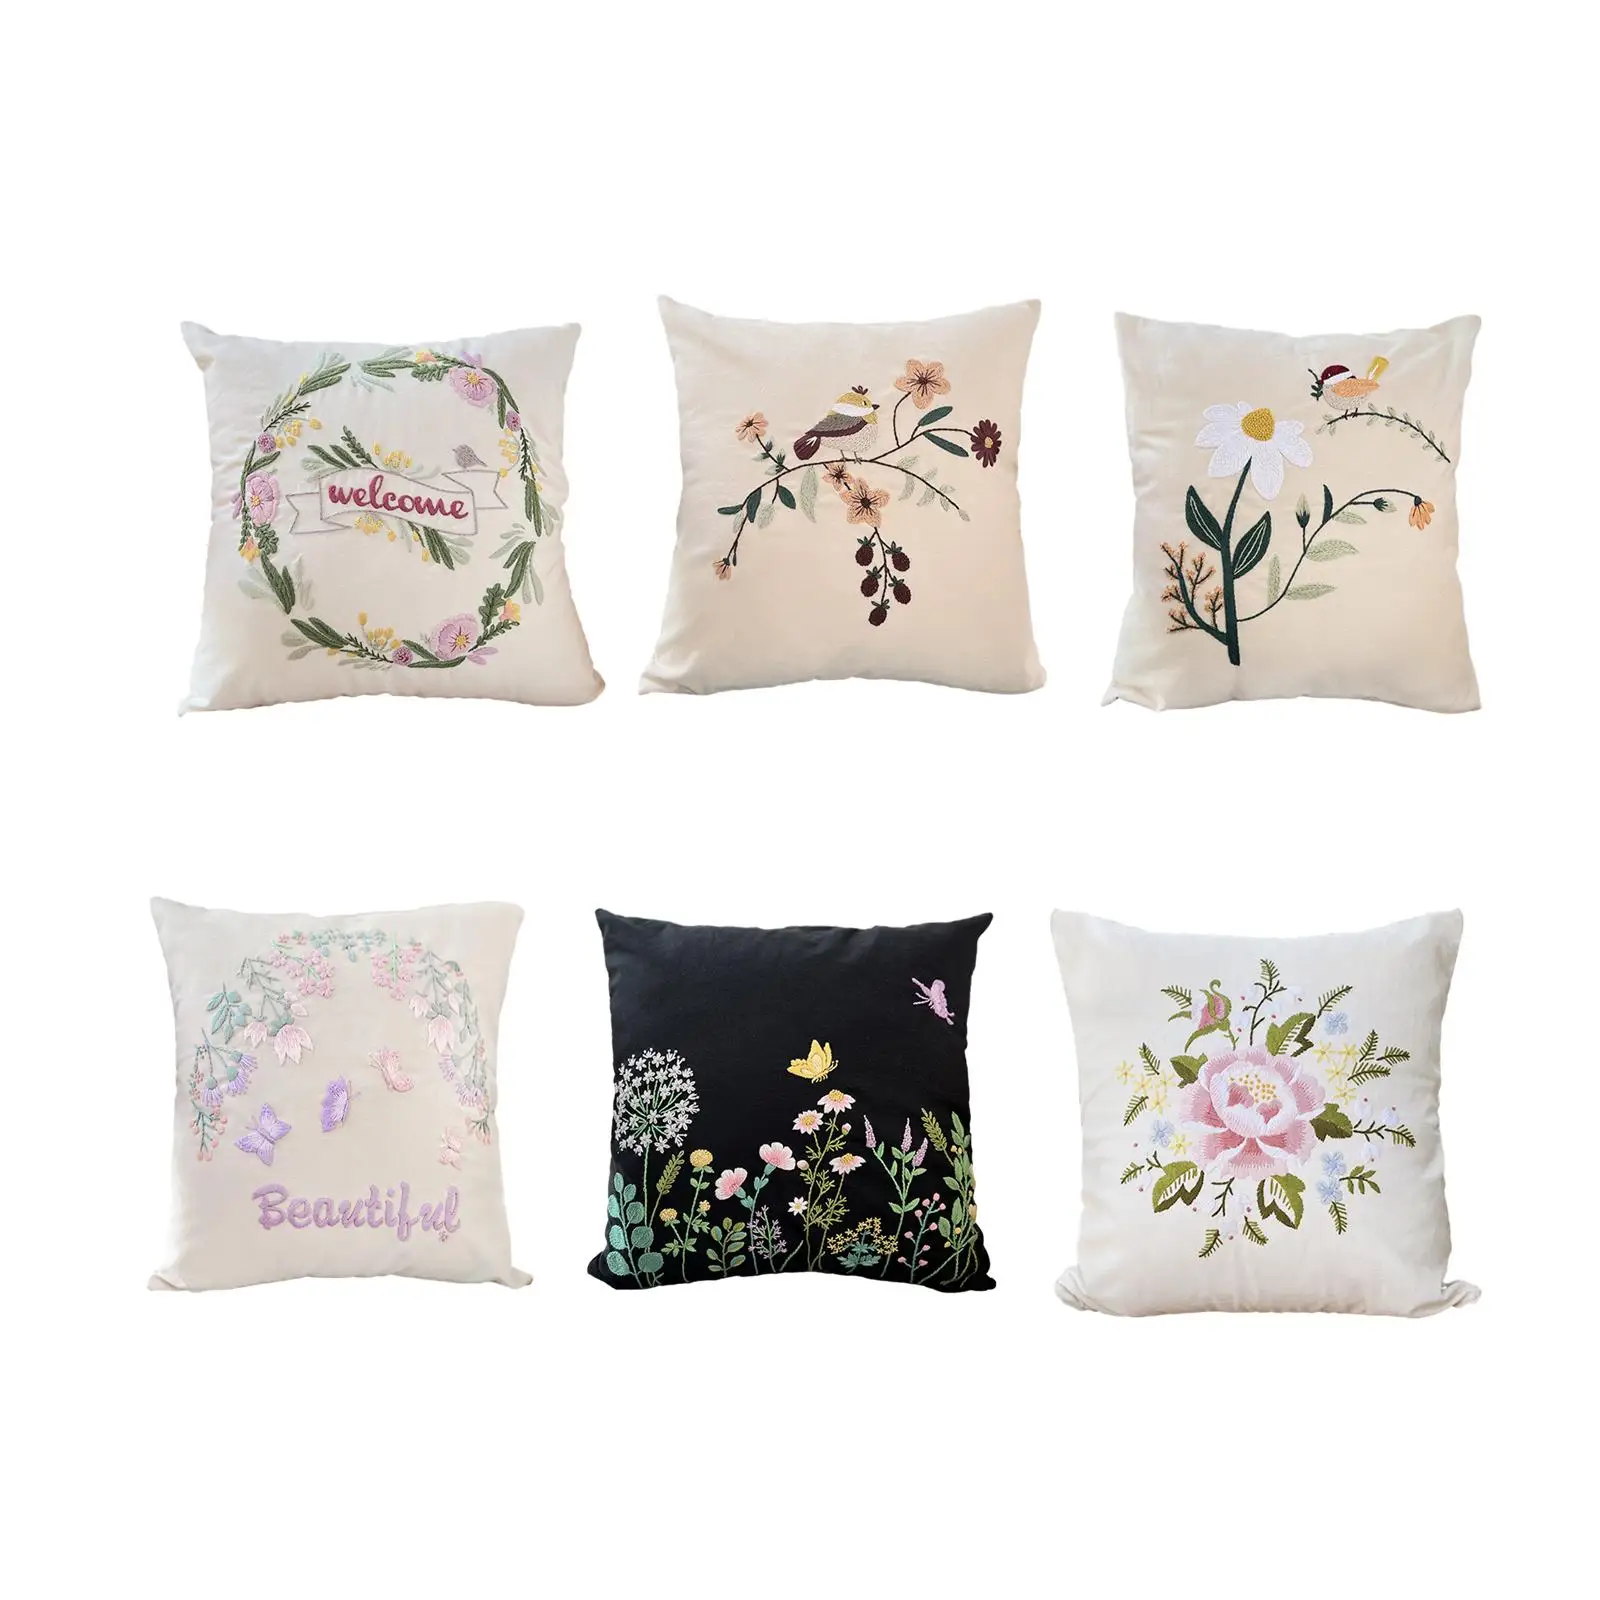 Embroidery Pillow Covers Kits Gift DIY Sewing Craft Decorative Pillow Cover Cushion Cases Semi-finished for Adults Beginners